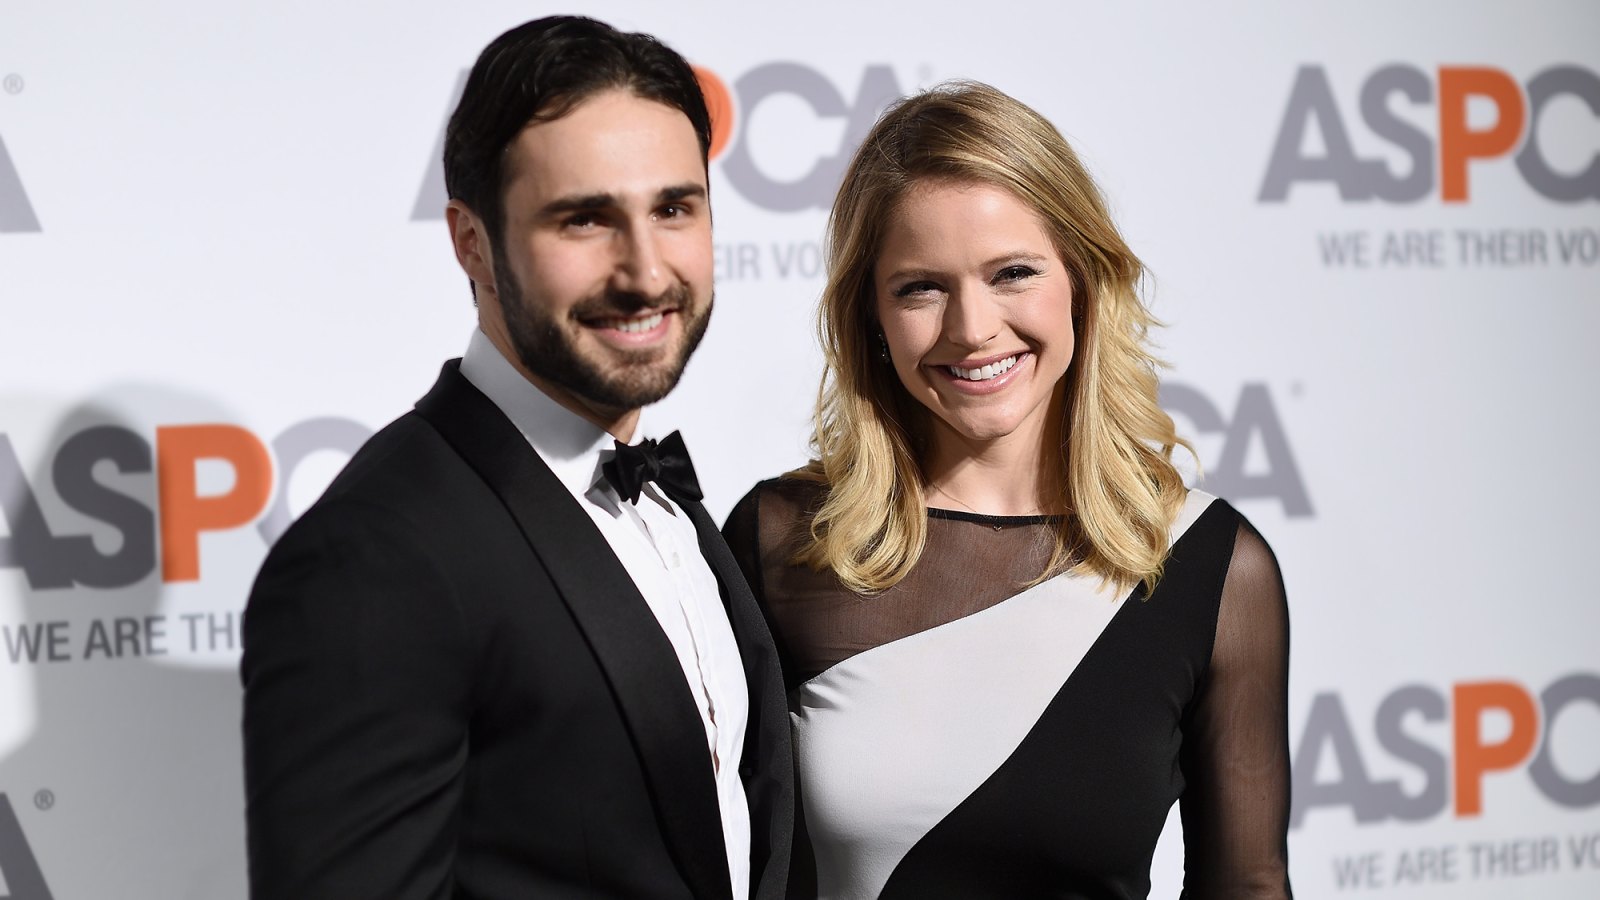 Sara Haines Is Pregnant, Expecting Her First Child With Husband Max Shifrin